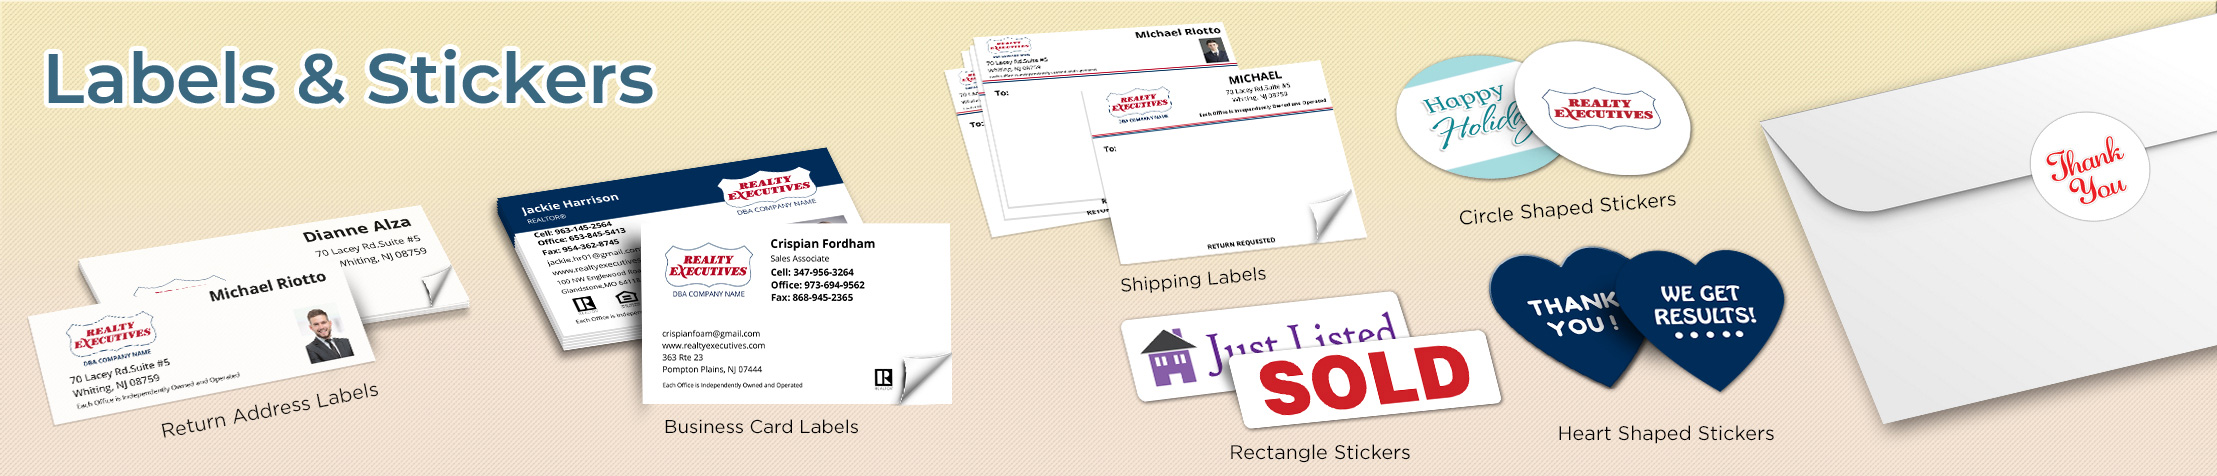 Realty Executives Real Estate Labels and Stickers - Realty Executives  business card labels, return address labels, shipping labels, and assorted stickers | BestPrintBuy.com